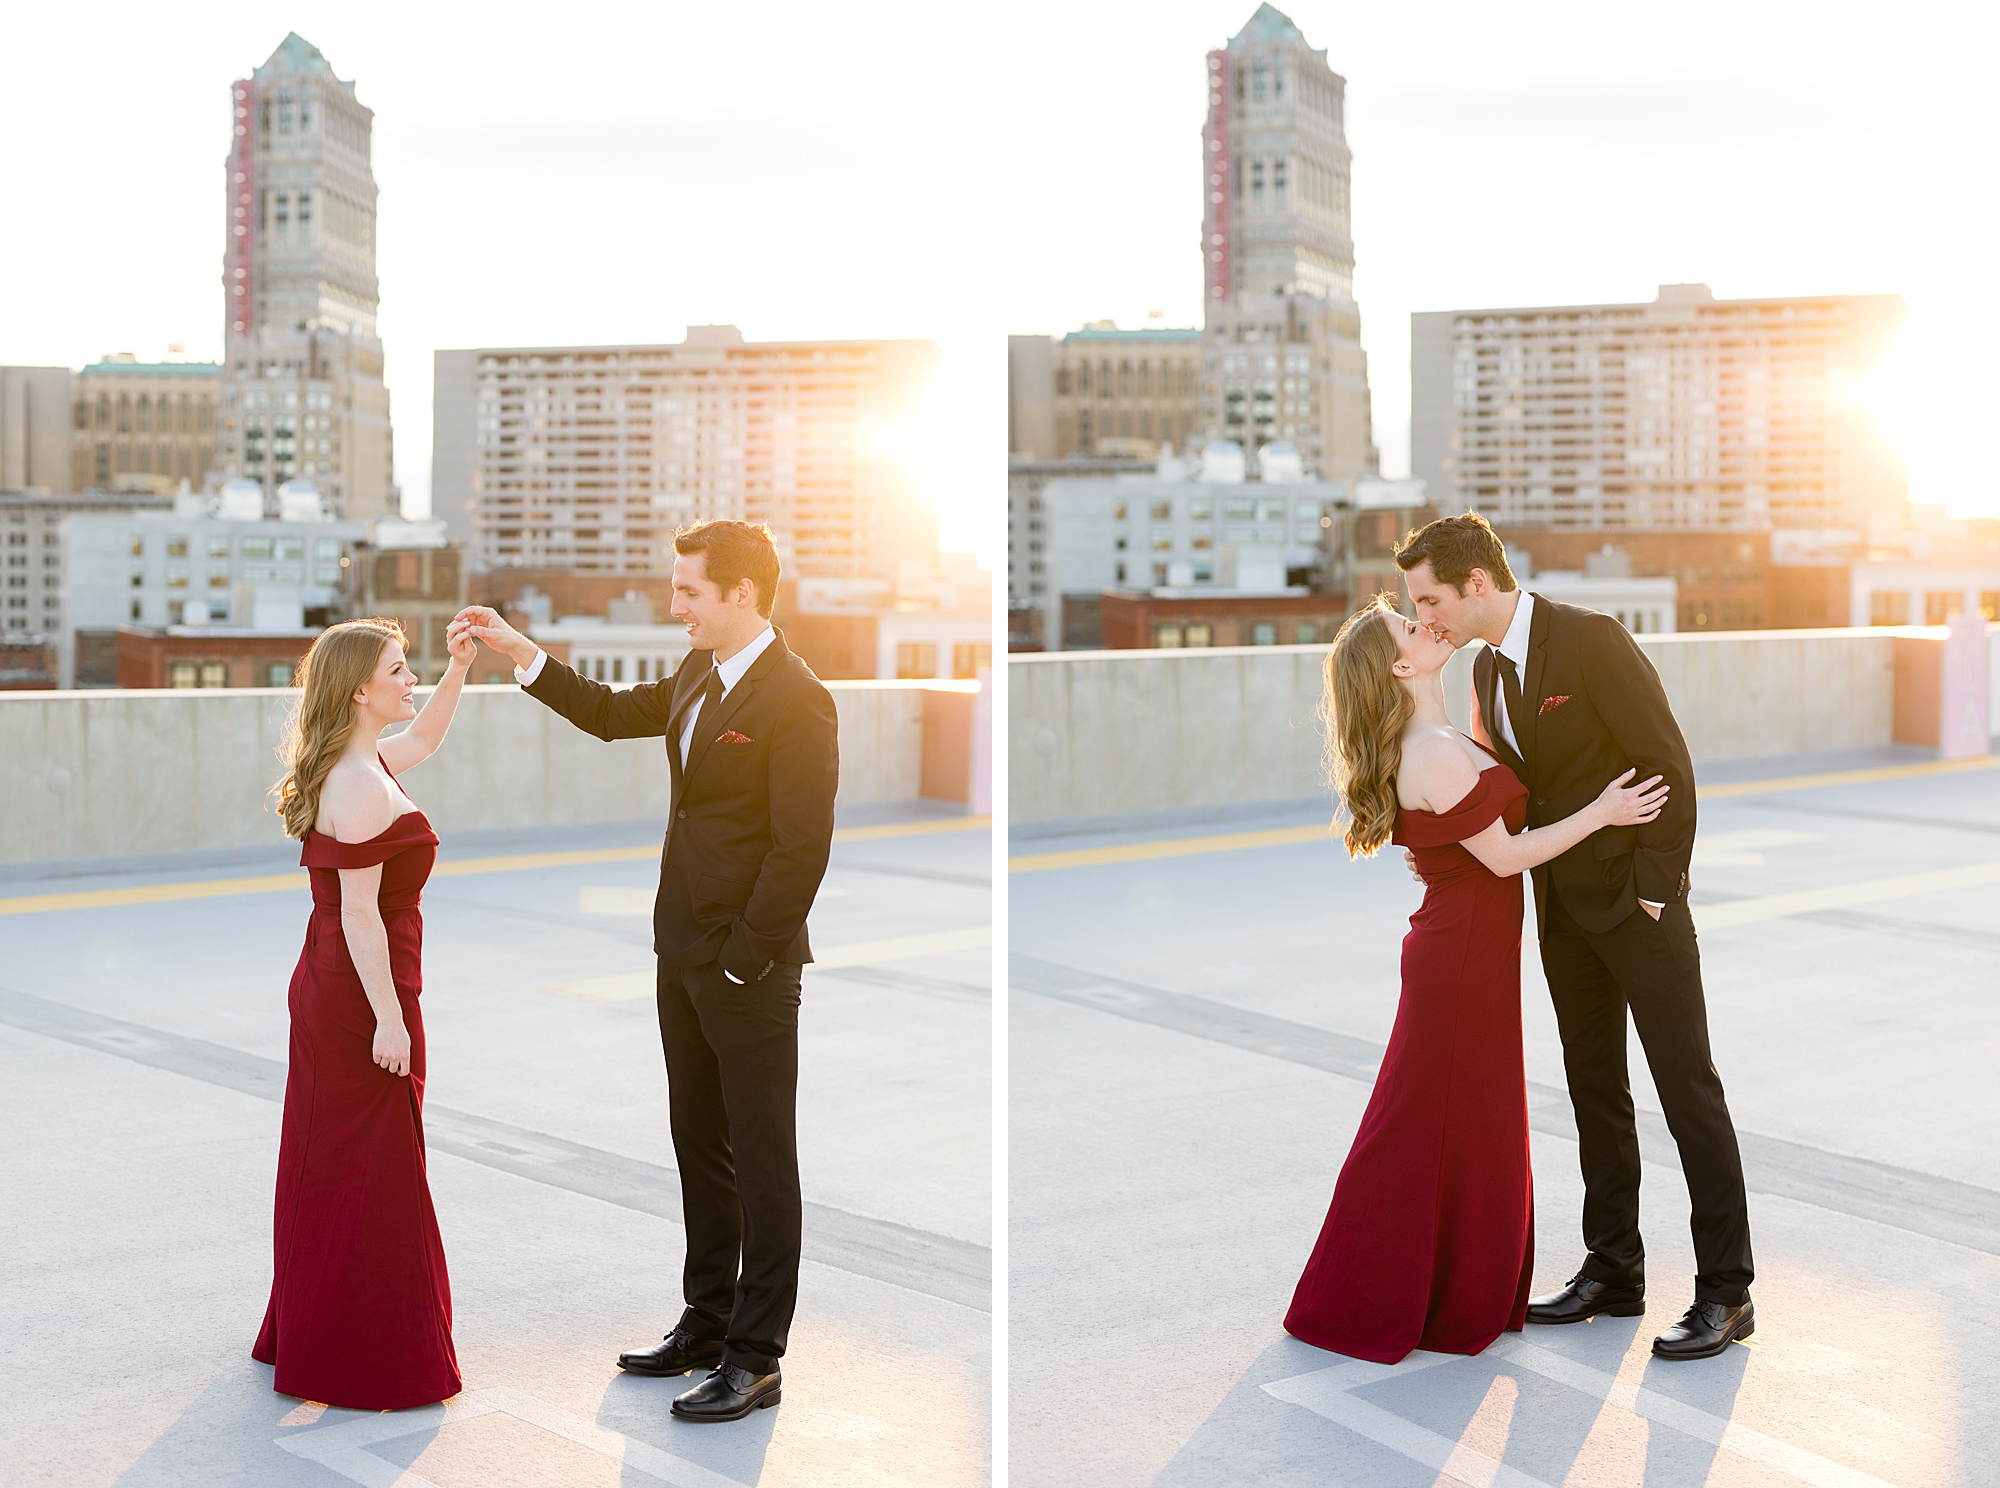 Dancing on the rooftop | Engagement photo inspiration | Detroit | Breanne Rochelle Photography